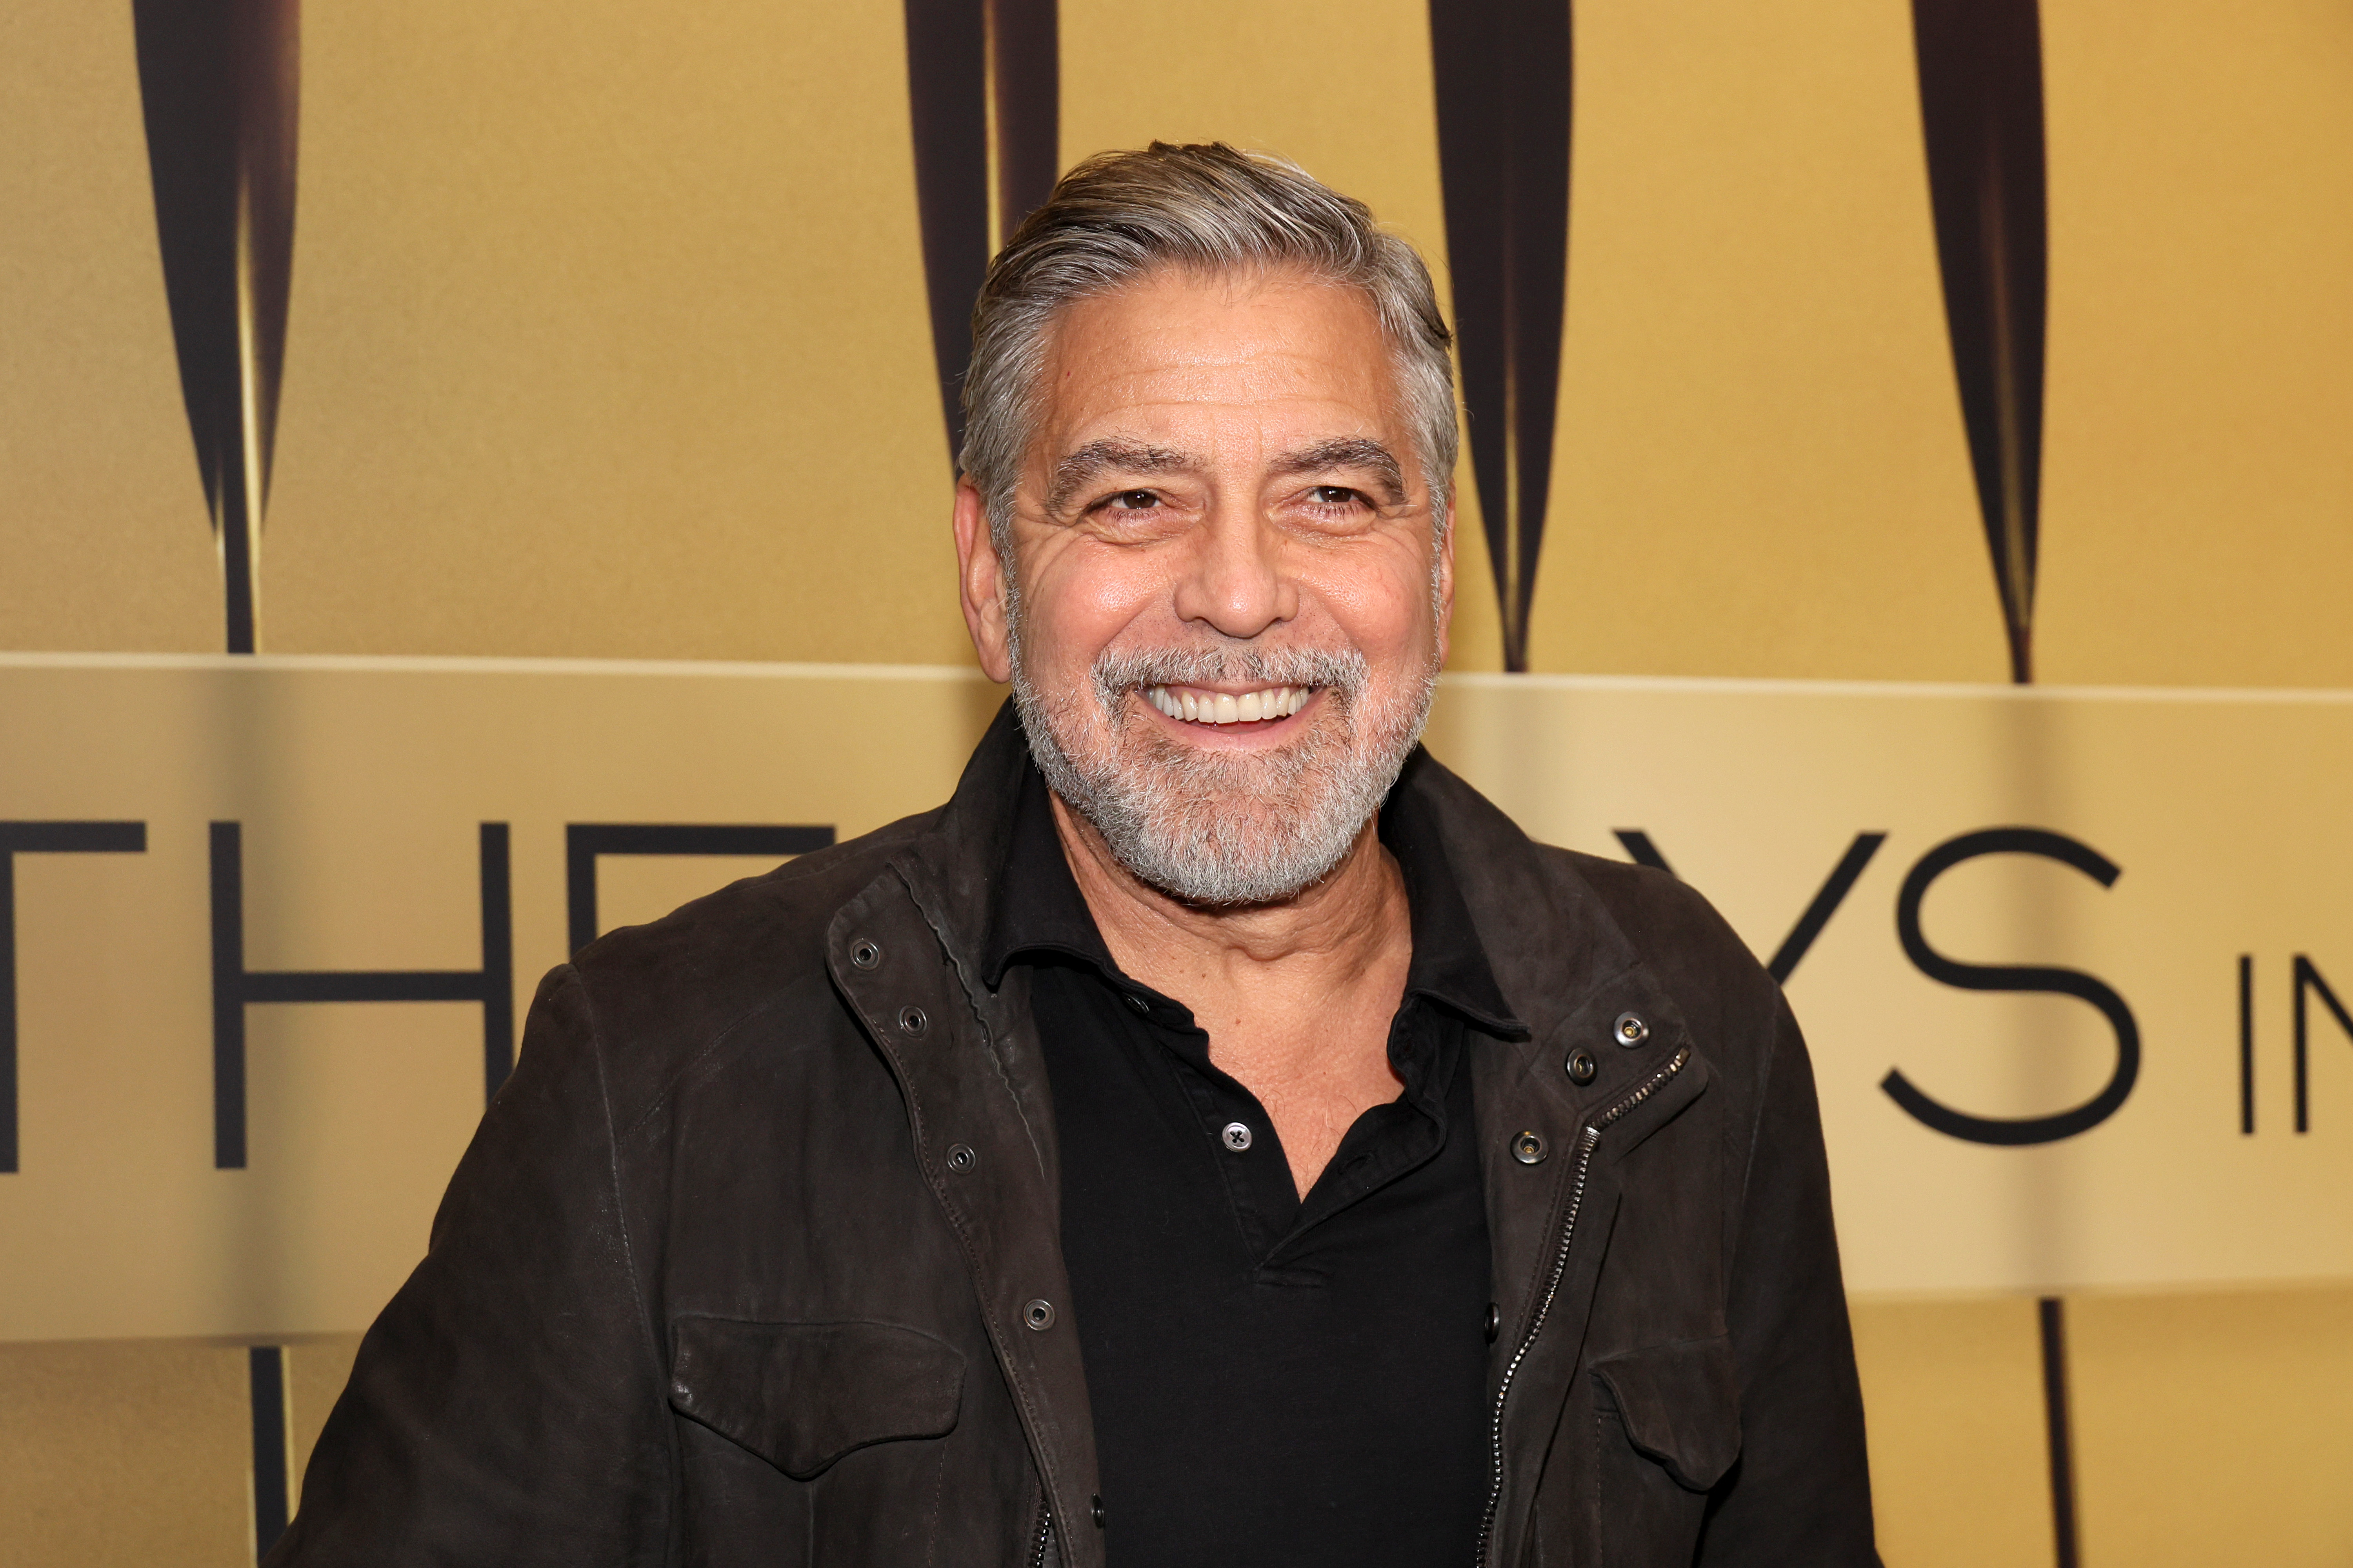 George Clooney at "The Boys In The Boat" screening on December 13, 2023 in New York City. | Source: Getty Images